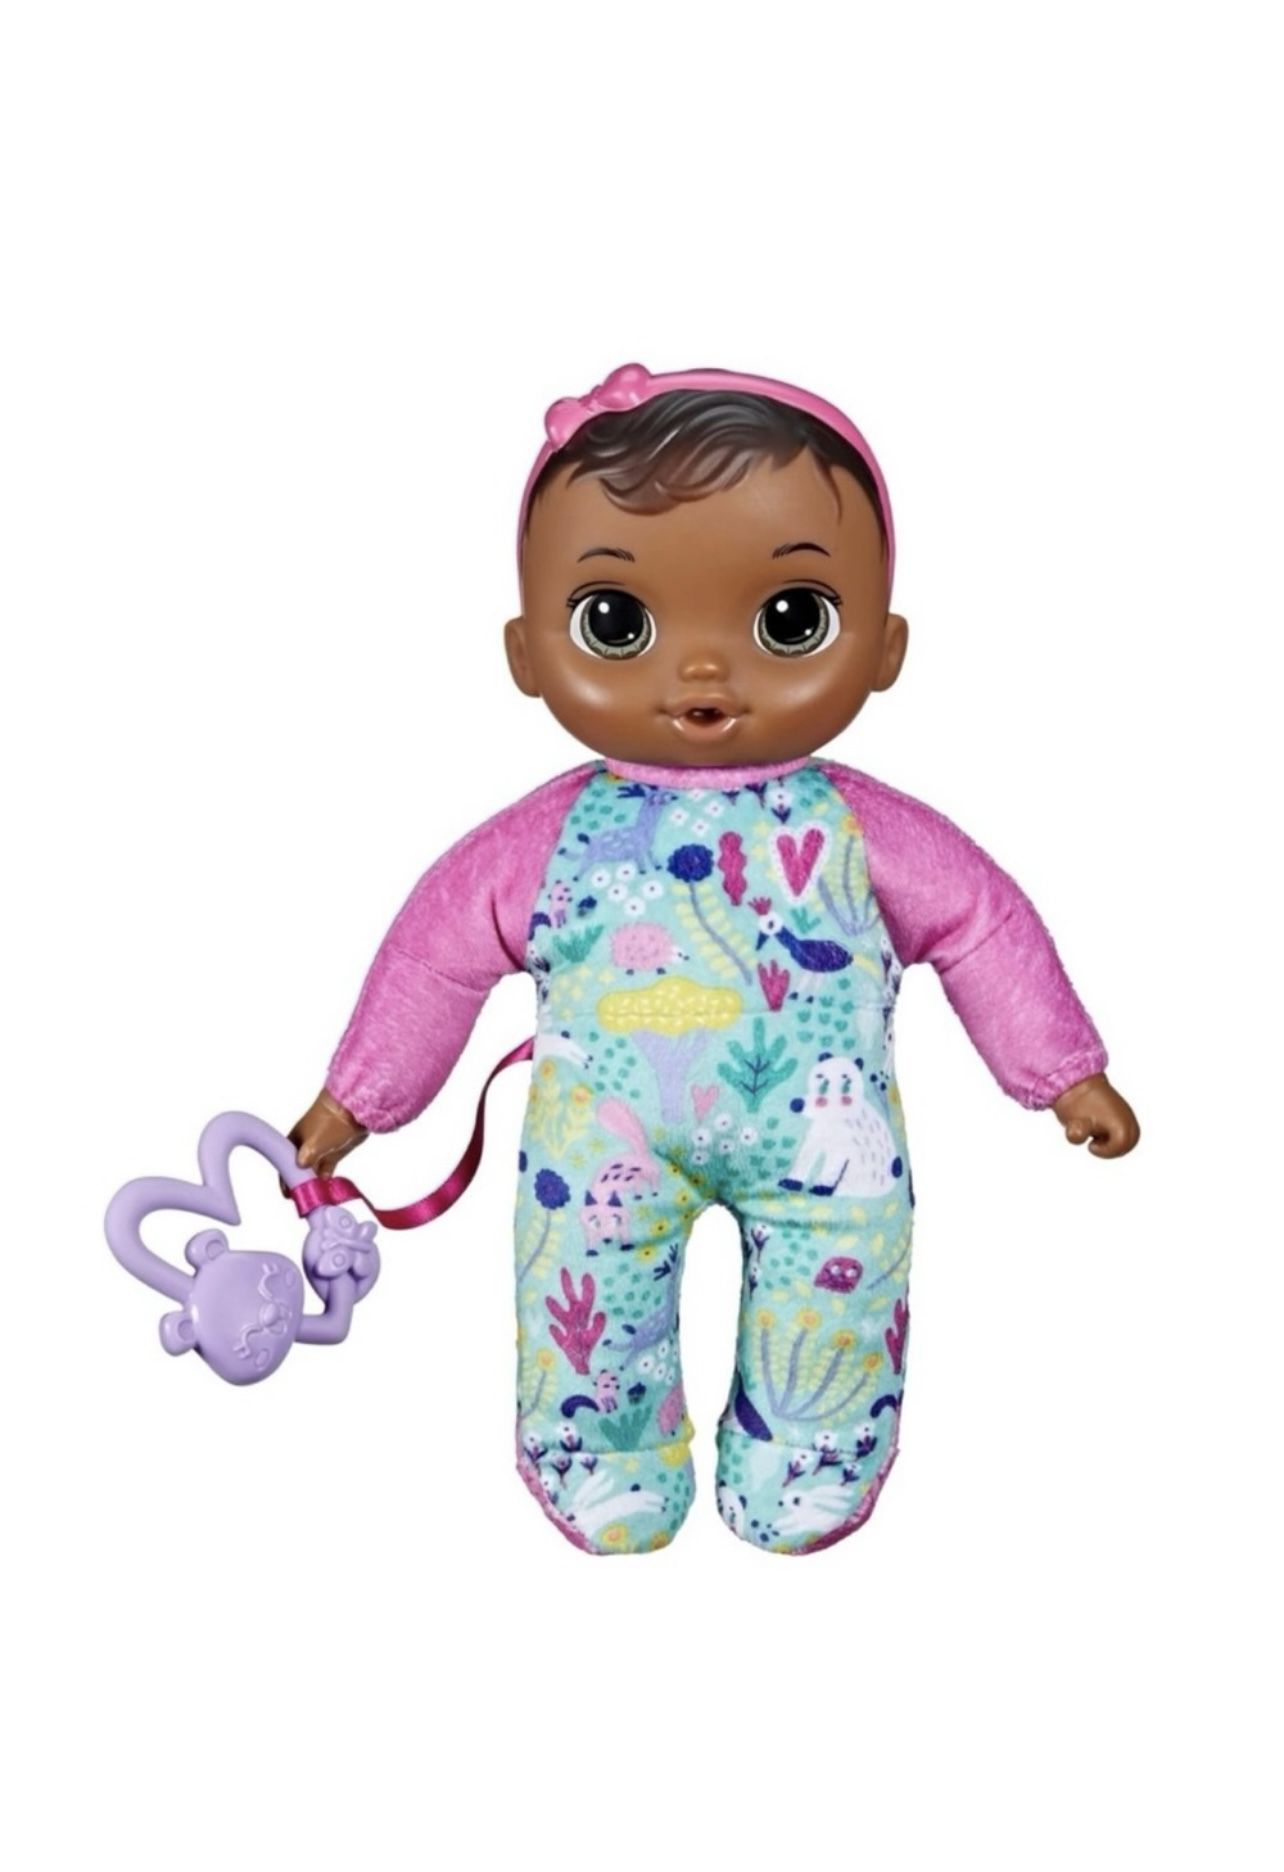 Baby Alive Soft ‘n Cute Doll Brown Hair 11-Inch Washable Teether Accessory